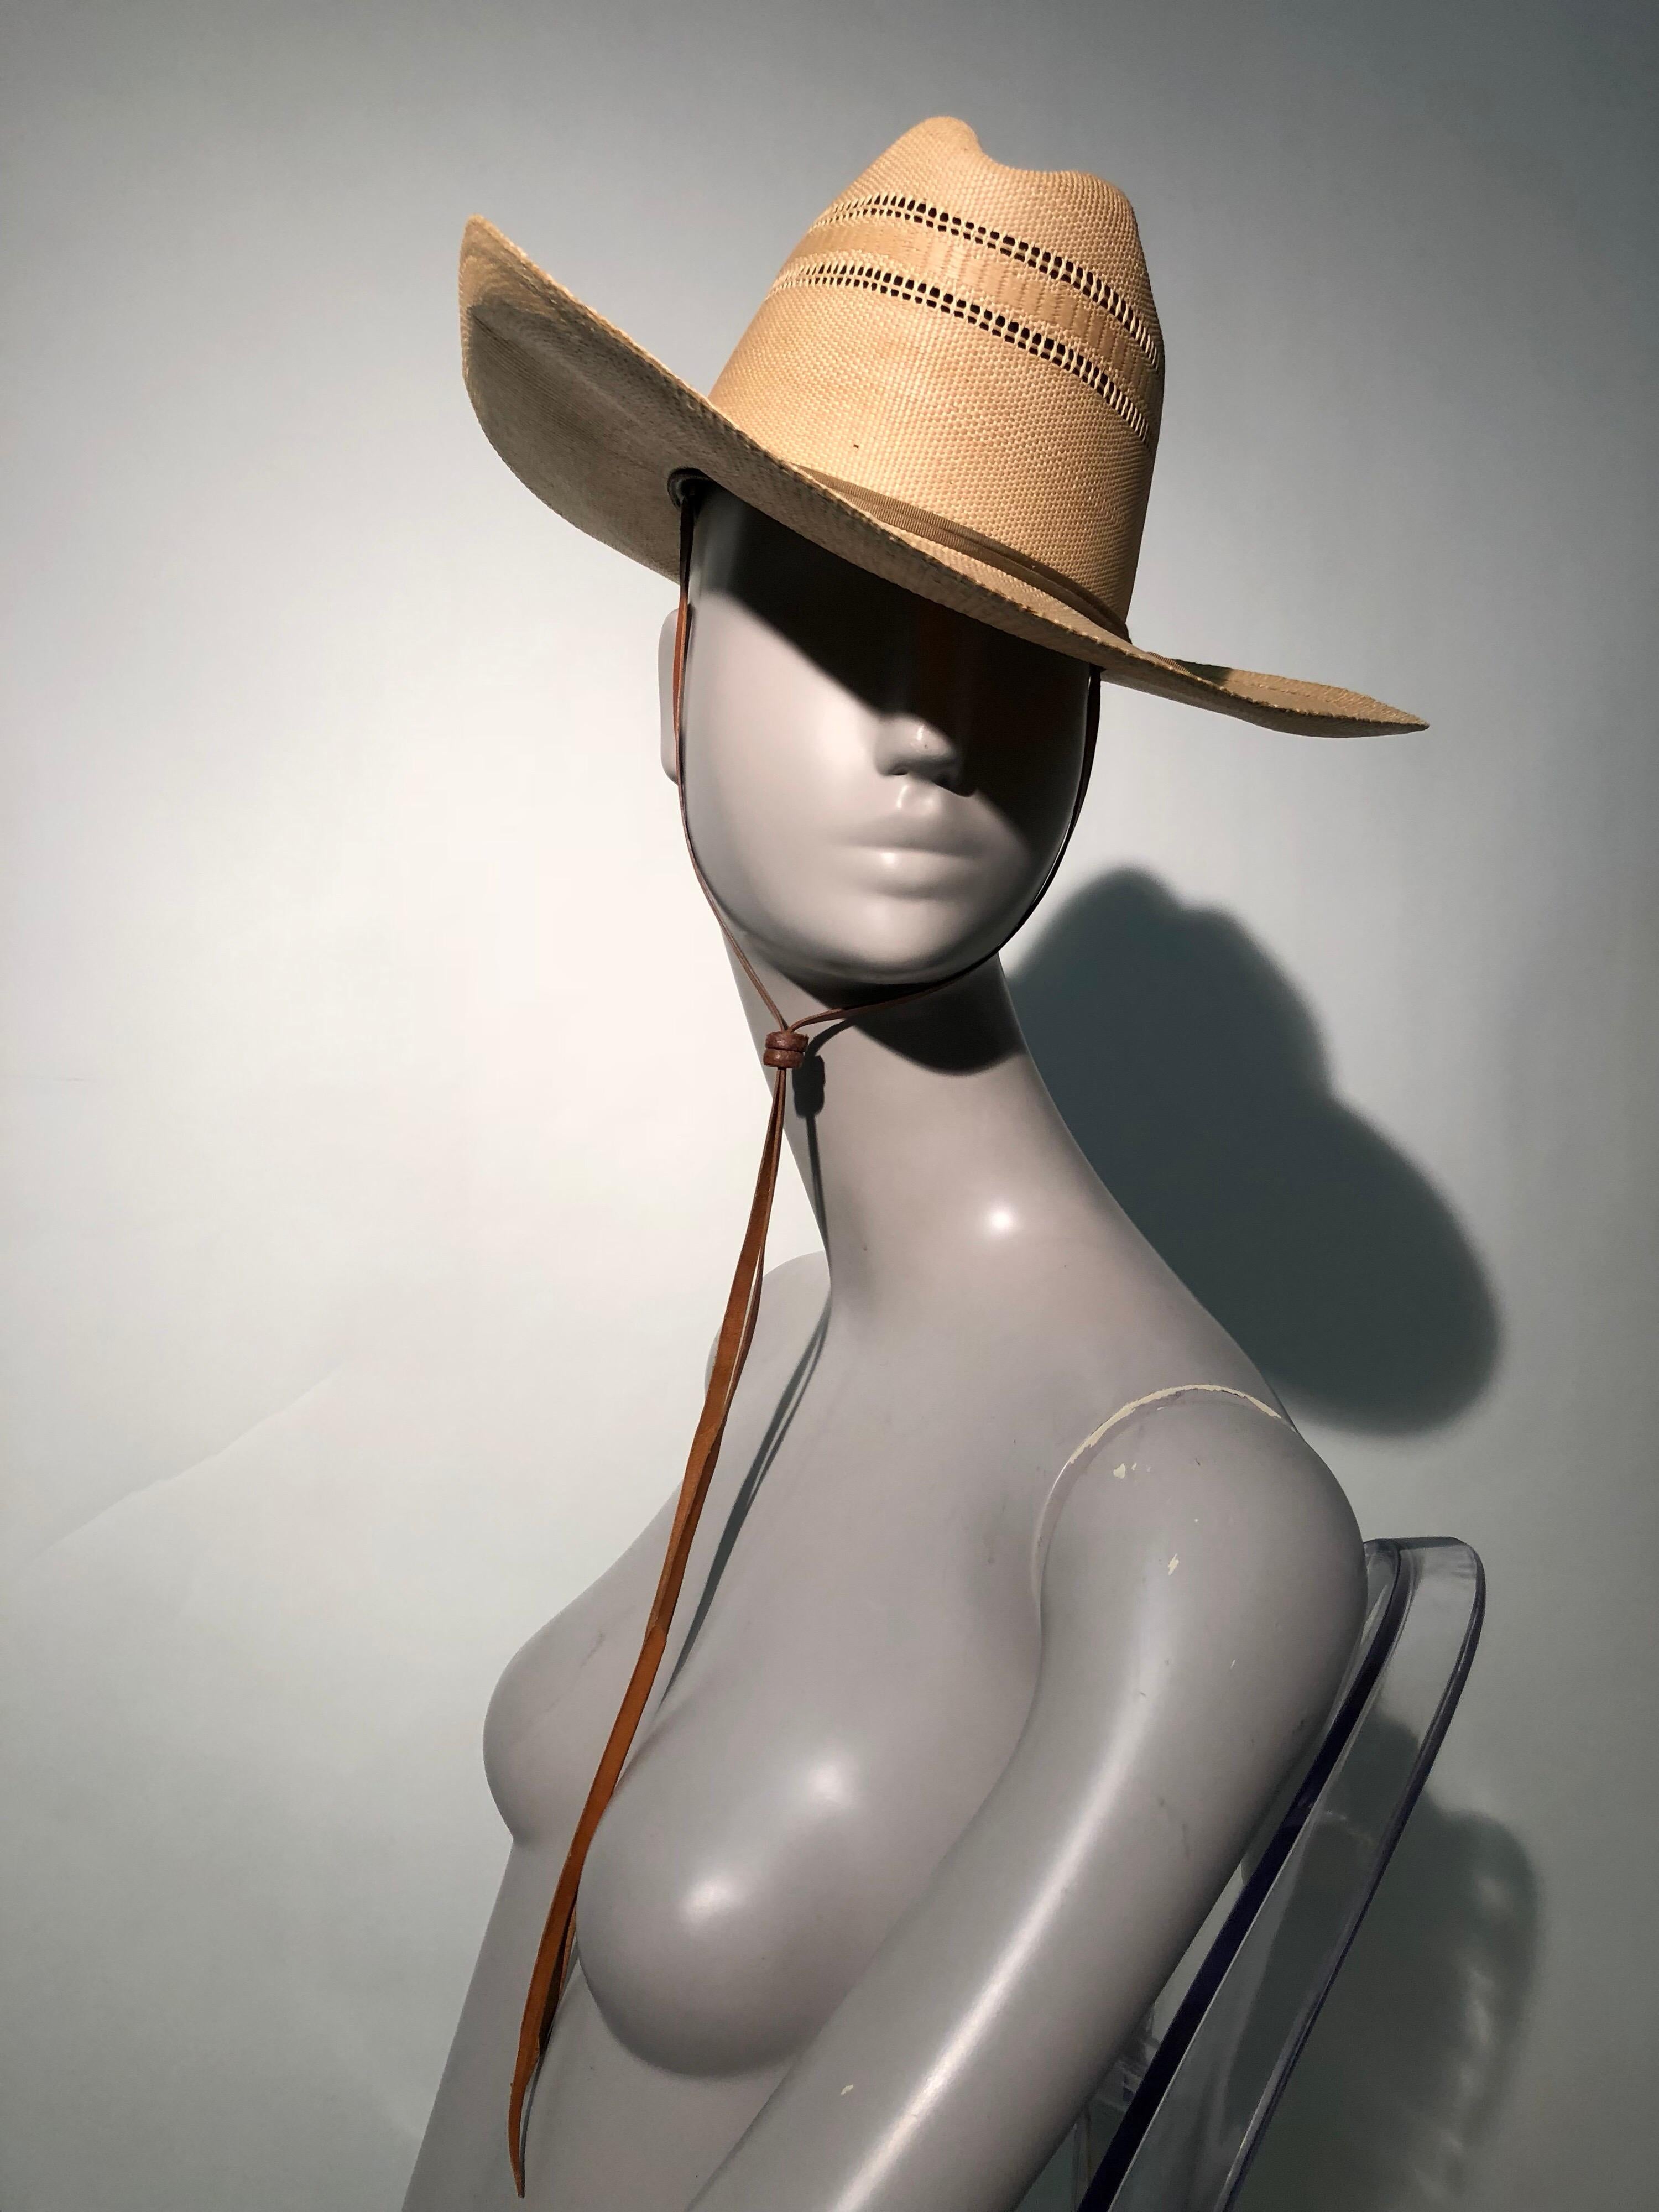 A wonderful 1950s Resistol woven straw cowboy or western hat. Wide, stiffly structured straw brim won't sag or blow in the wind and the crown features woven-in ventilation. A leather chin strap is secured with 2 heavy leather toggle-like clasp